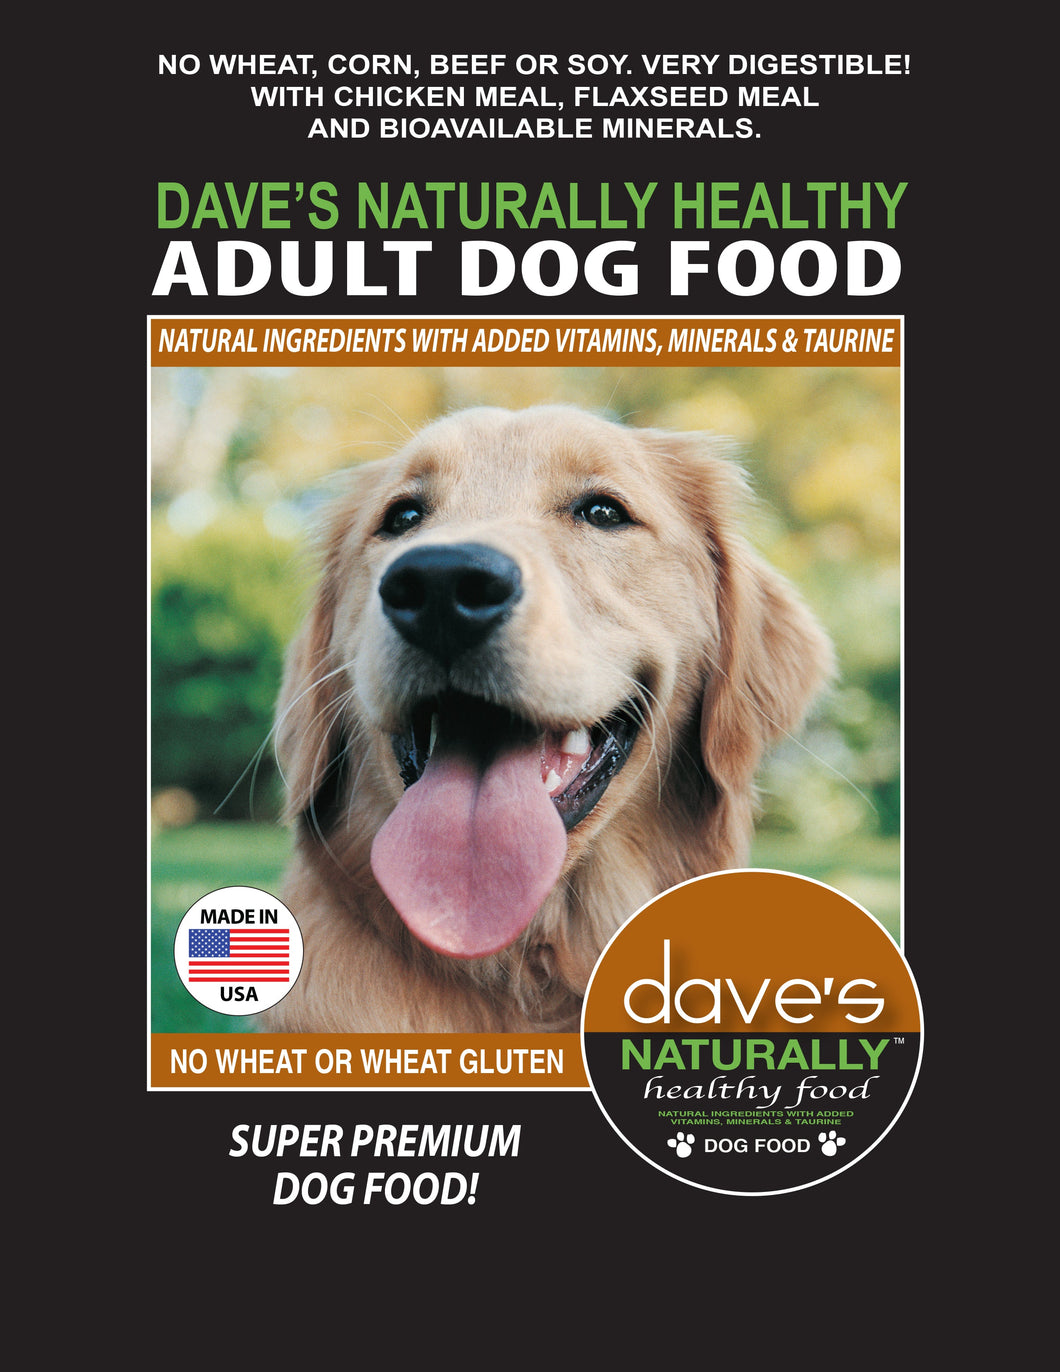 Dave’s Naturally Healthy™ Adult Dog Food